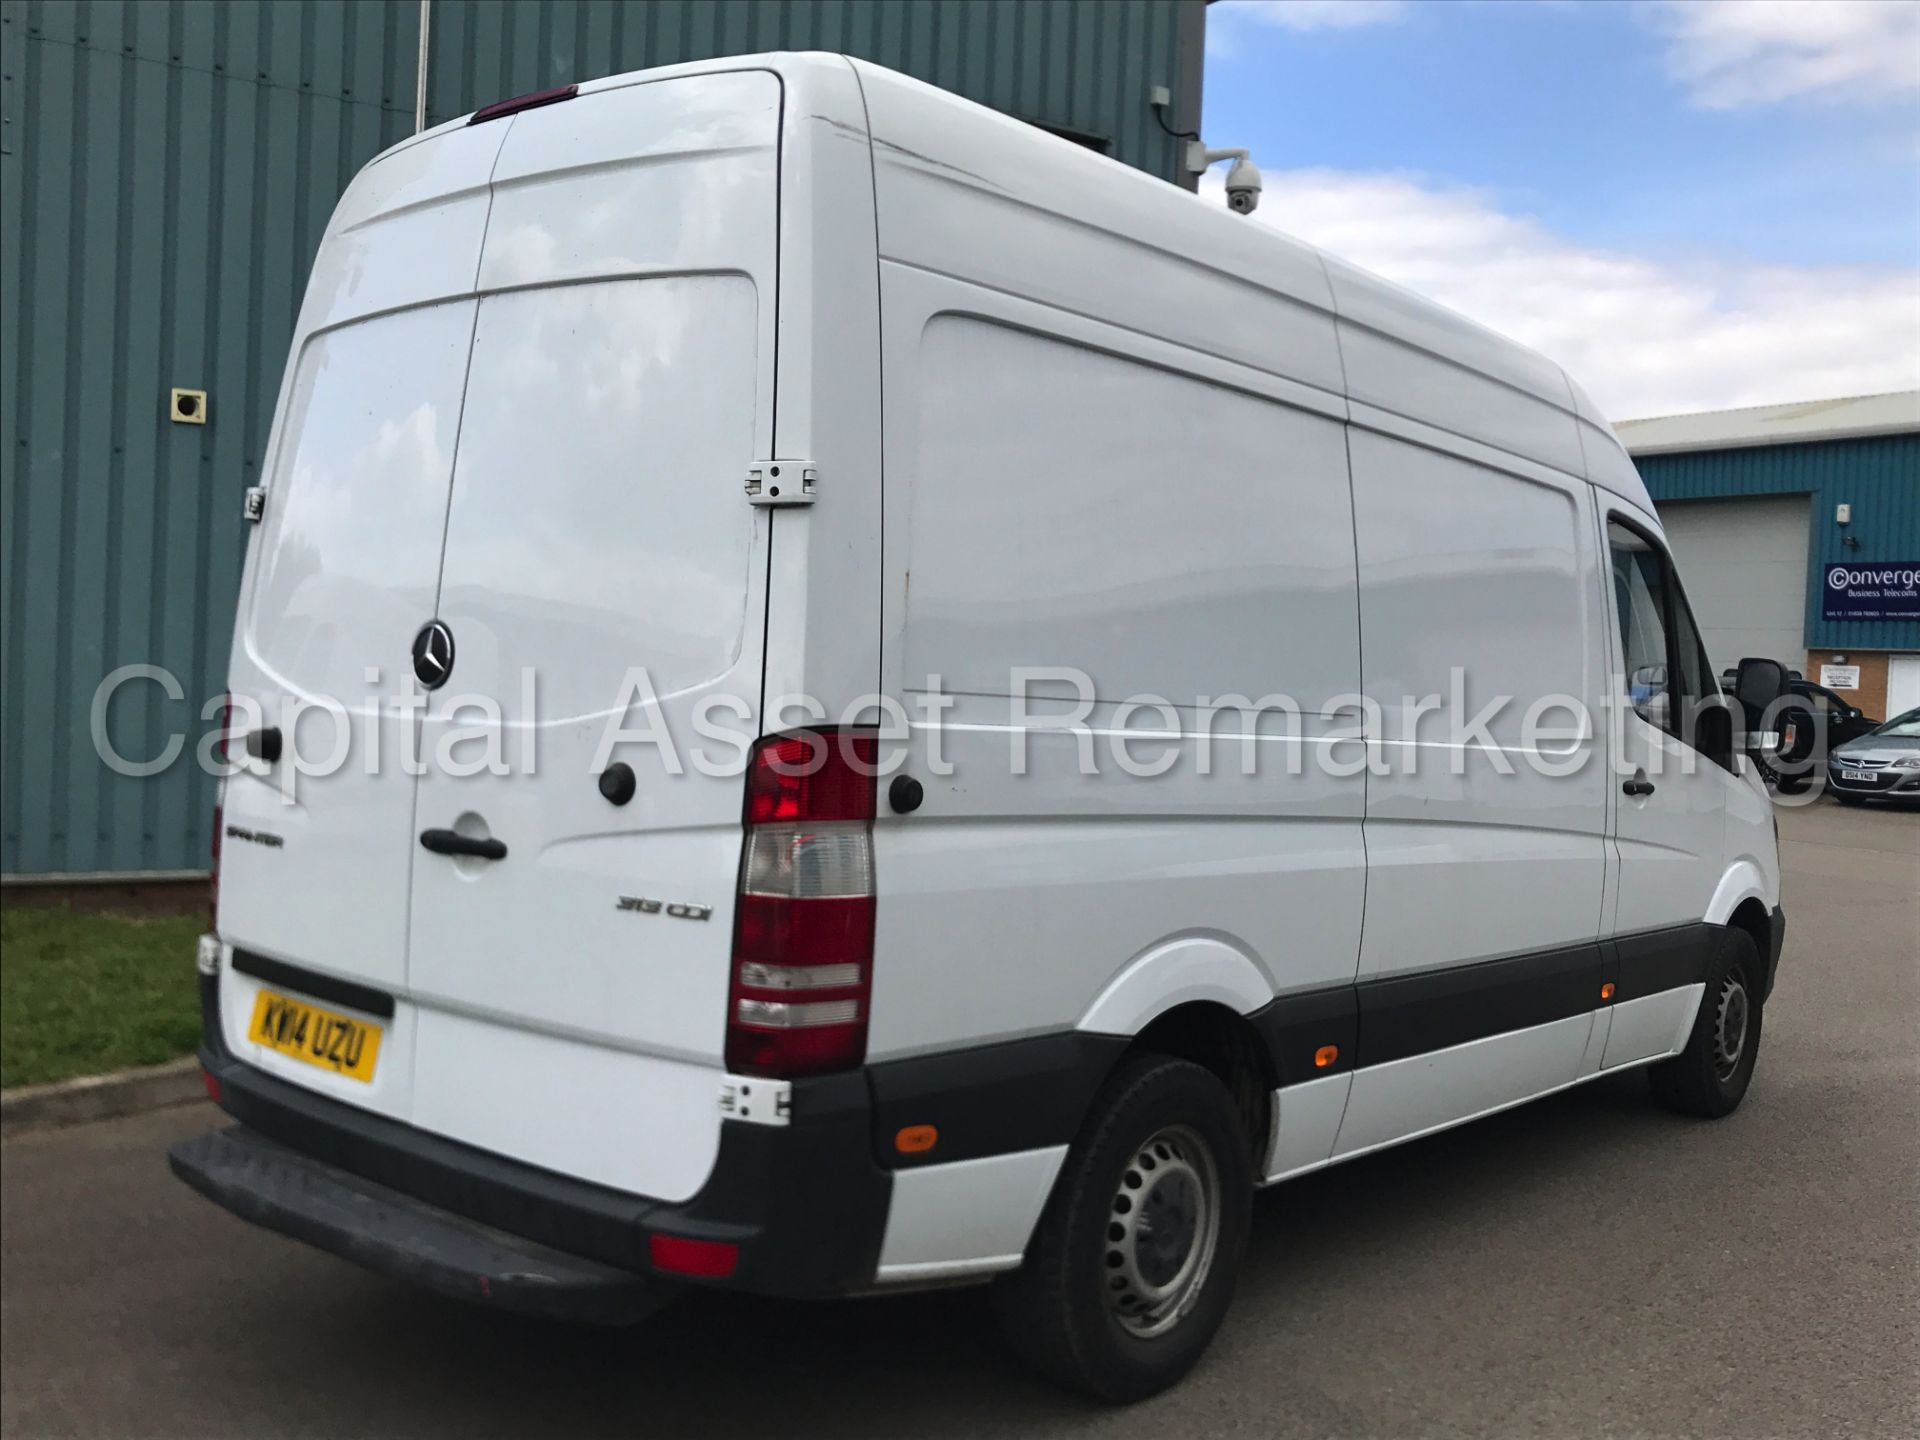 MERCEDES-BENZ SPRINTER 313 CDI 'MWB HI-ROOF' (2014) '130 BHP - 6 SPEED' (1 COMPANY OWNER FROM NEW) - Image 6 of 22